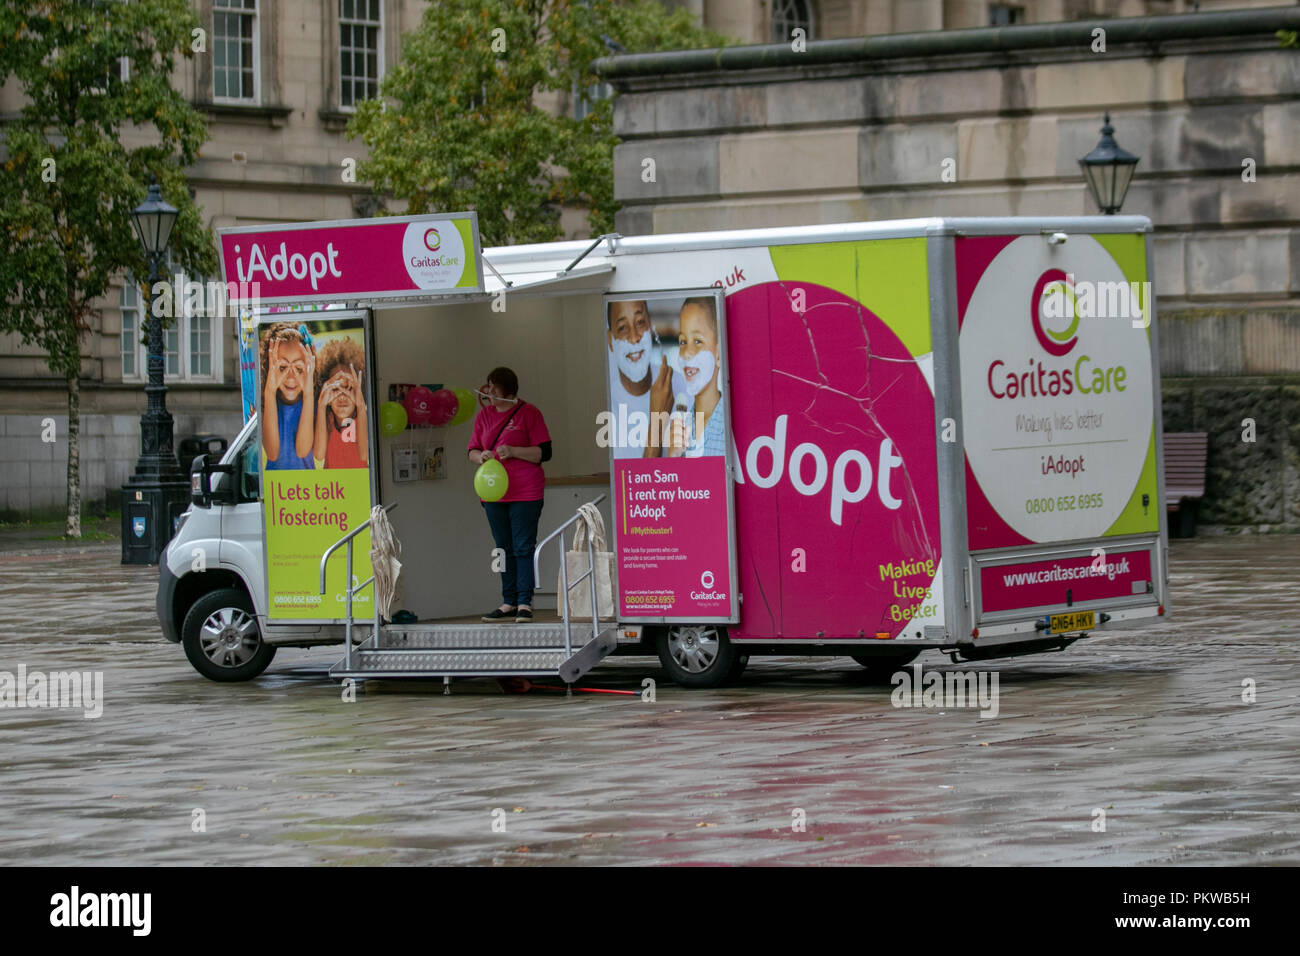 iAdopt Caritas Care fostering promotion vehicle, Adoption information and promotion in Preston, UK Stock Photo